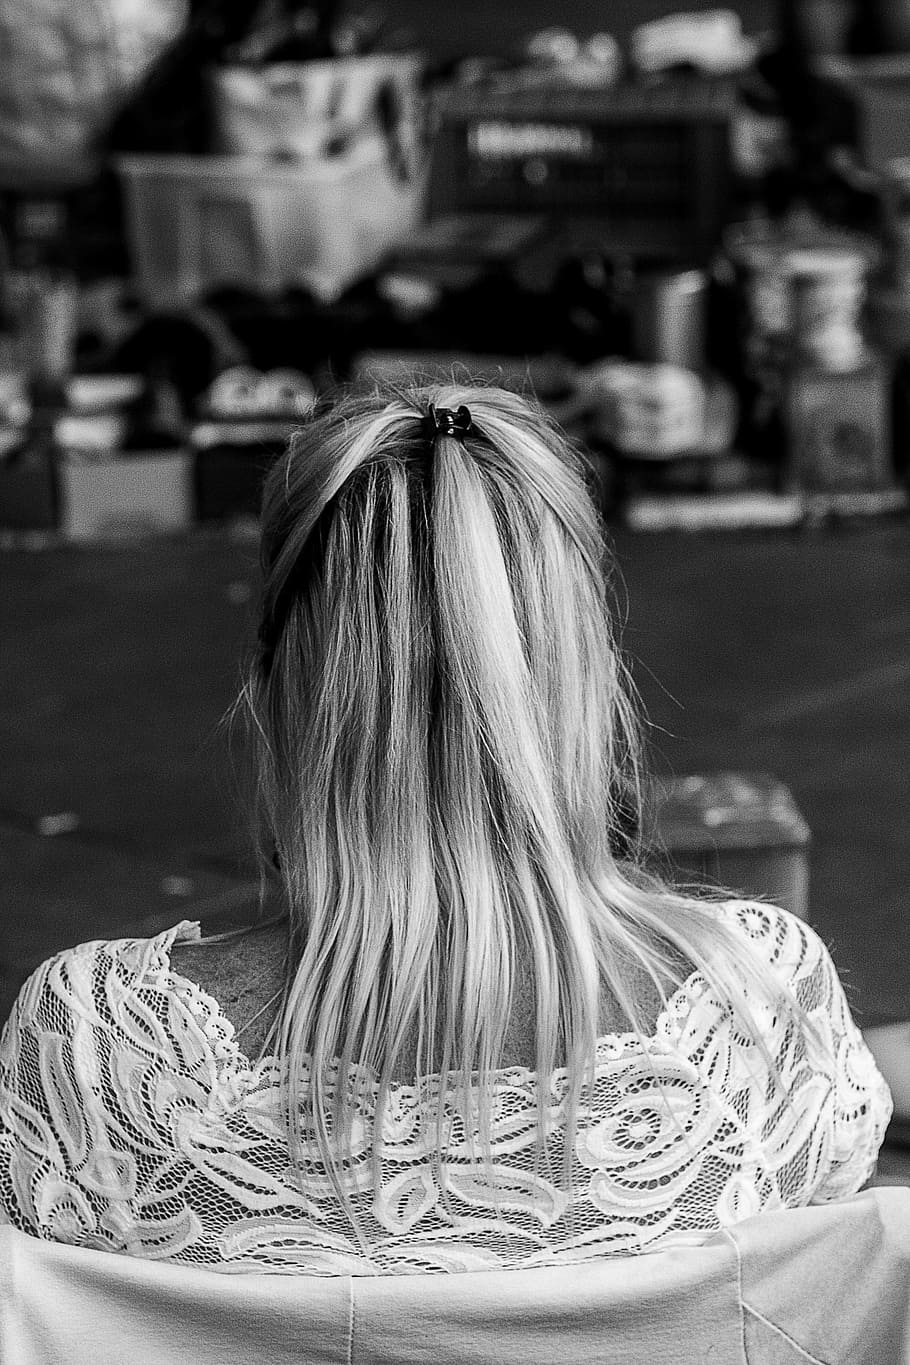 street photography, black white, genk, zomermarkt, women, hair, hairstyle, real people, rear view, one person